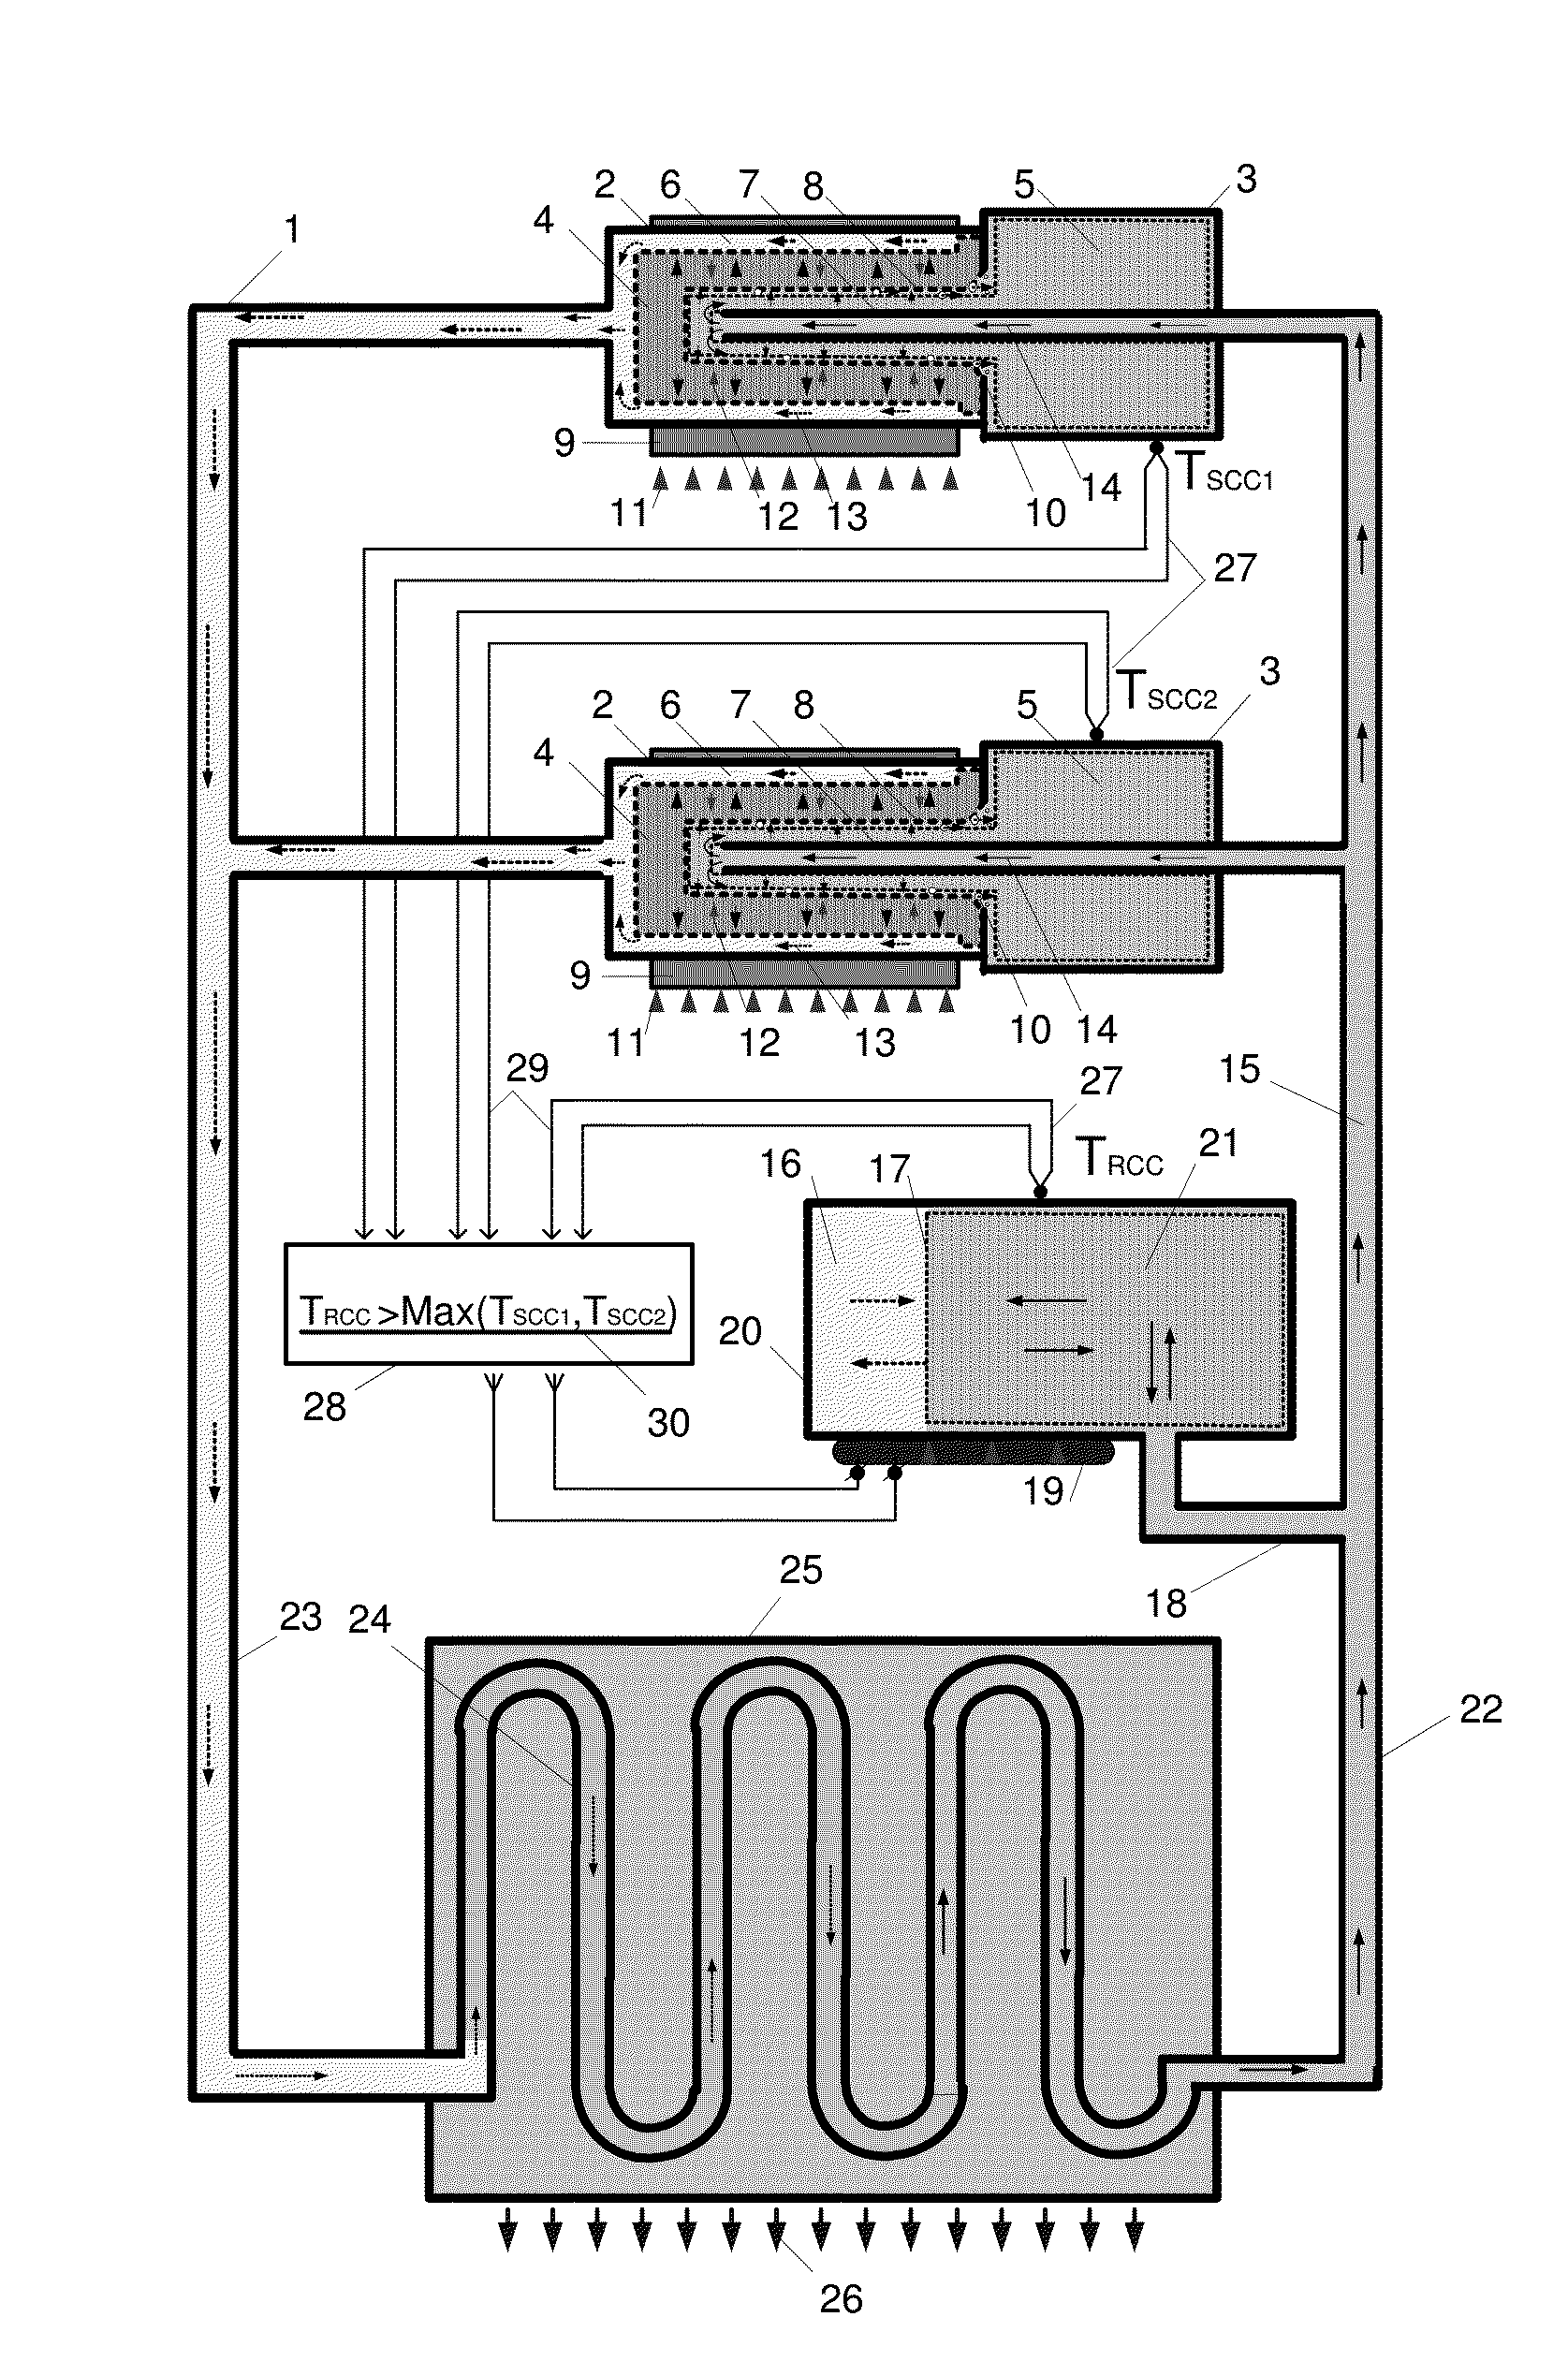 Advanced control two phase heat transfer loop